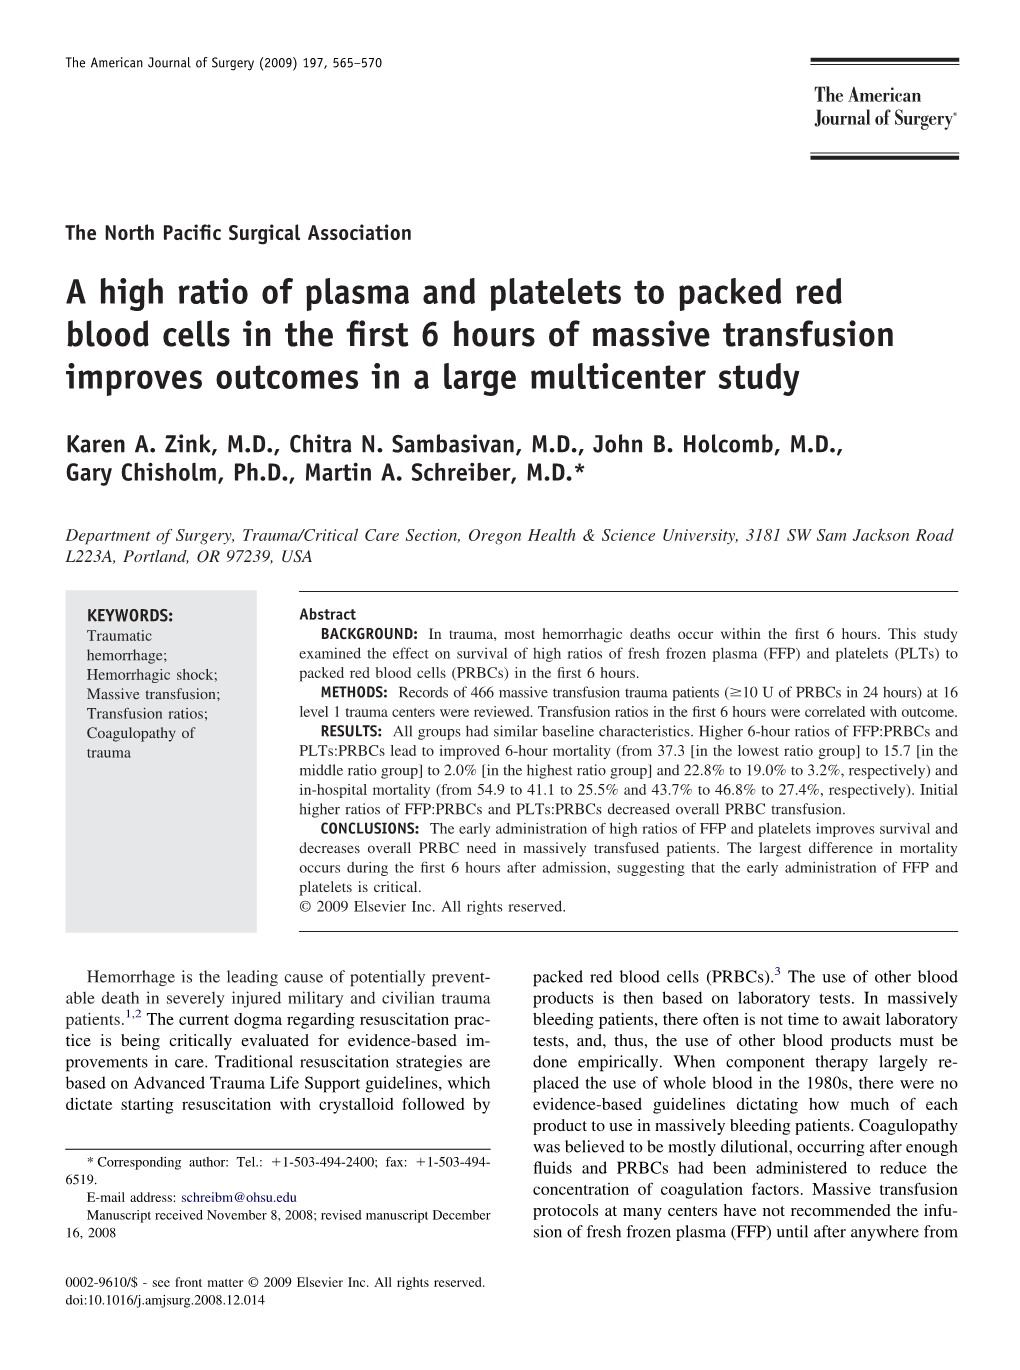 A High Ratio of Plasma and Platelets to Packed Red Blood Cells in the First 6